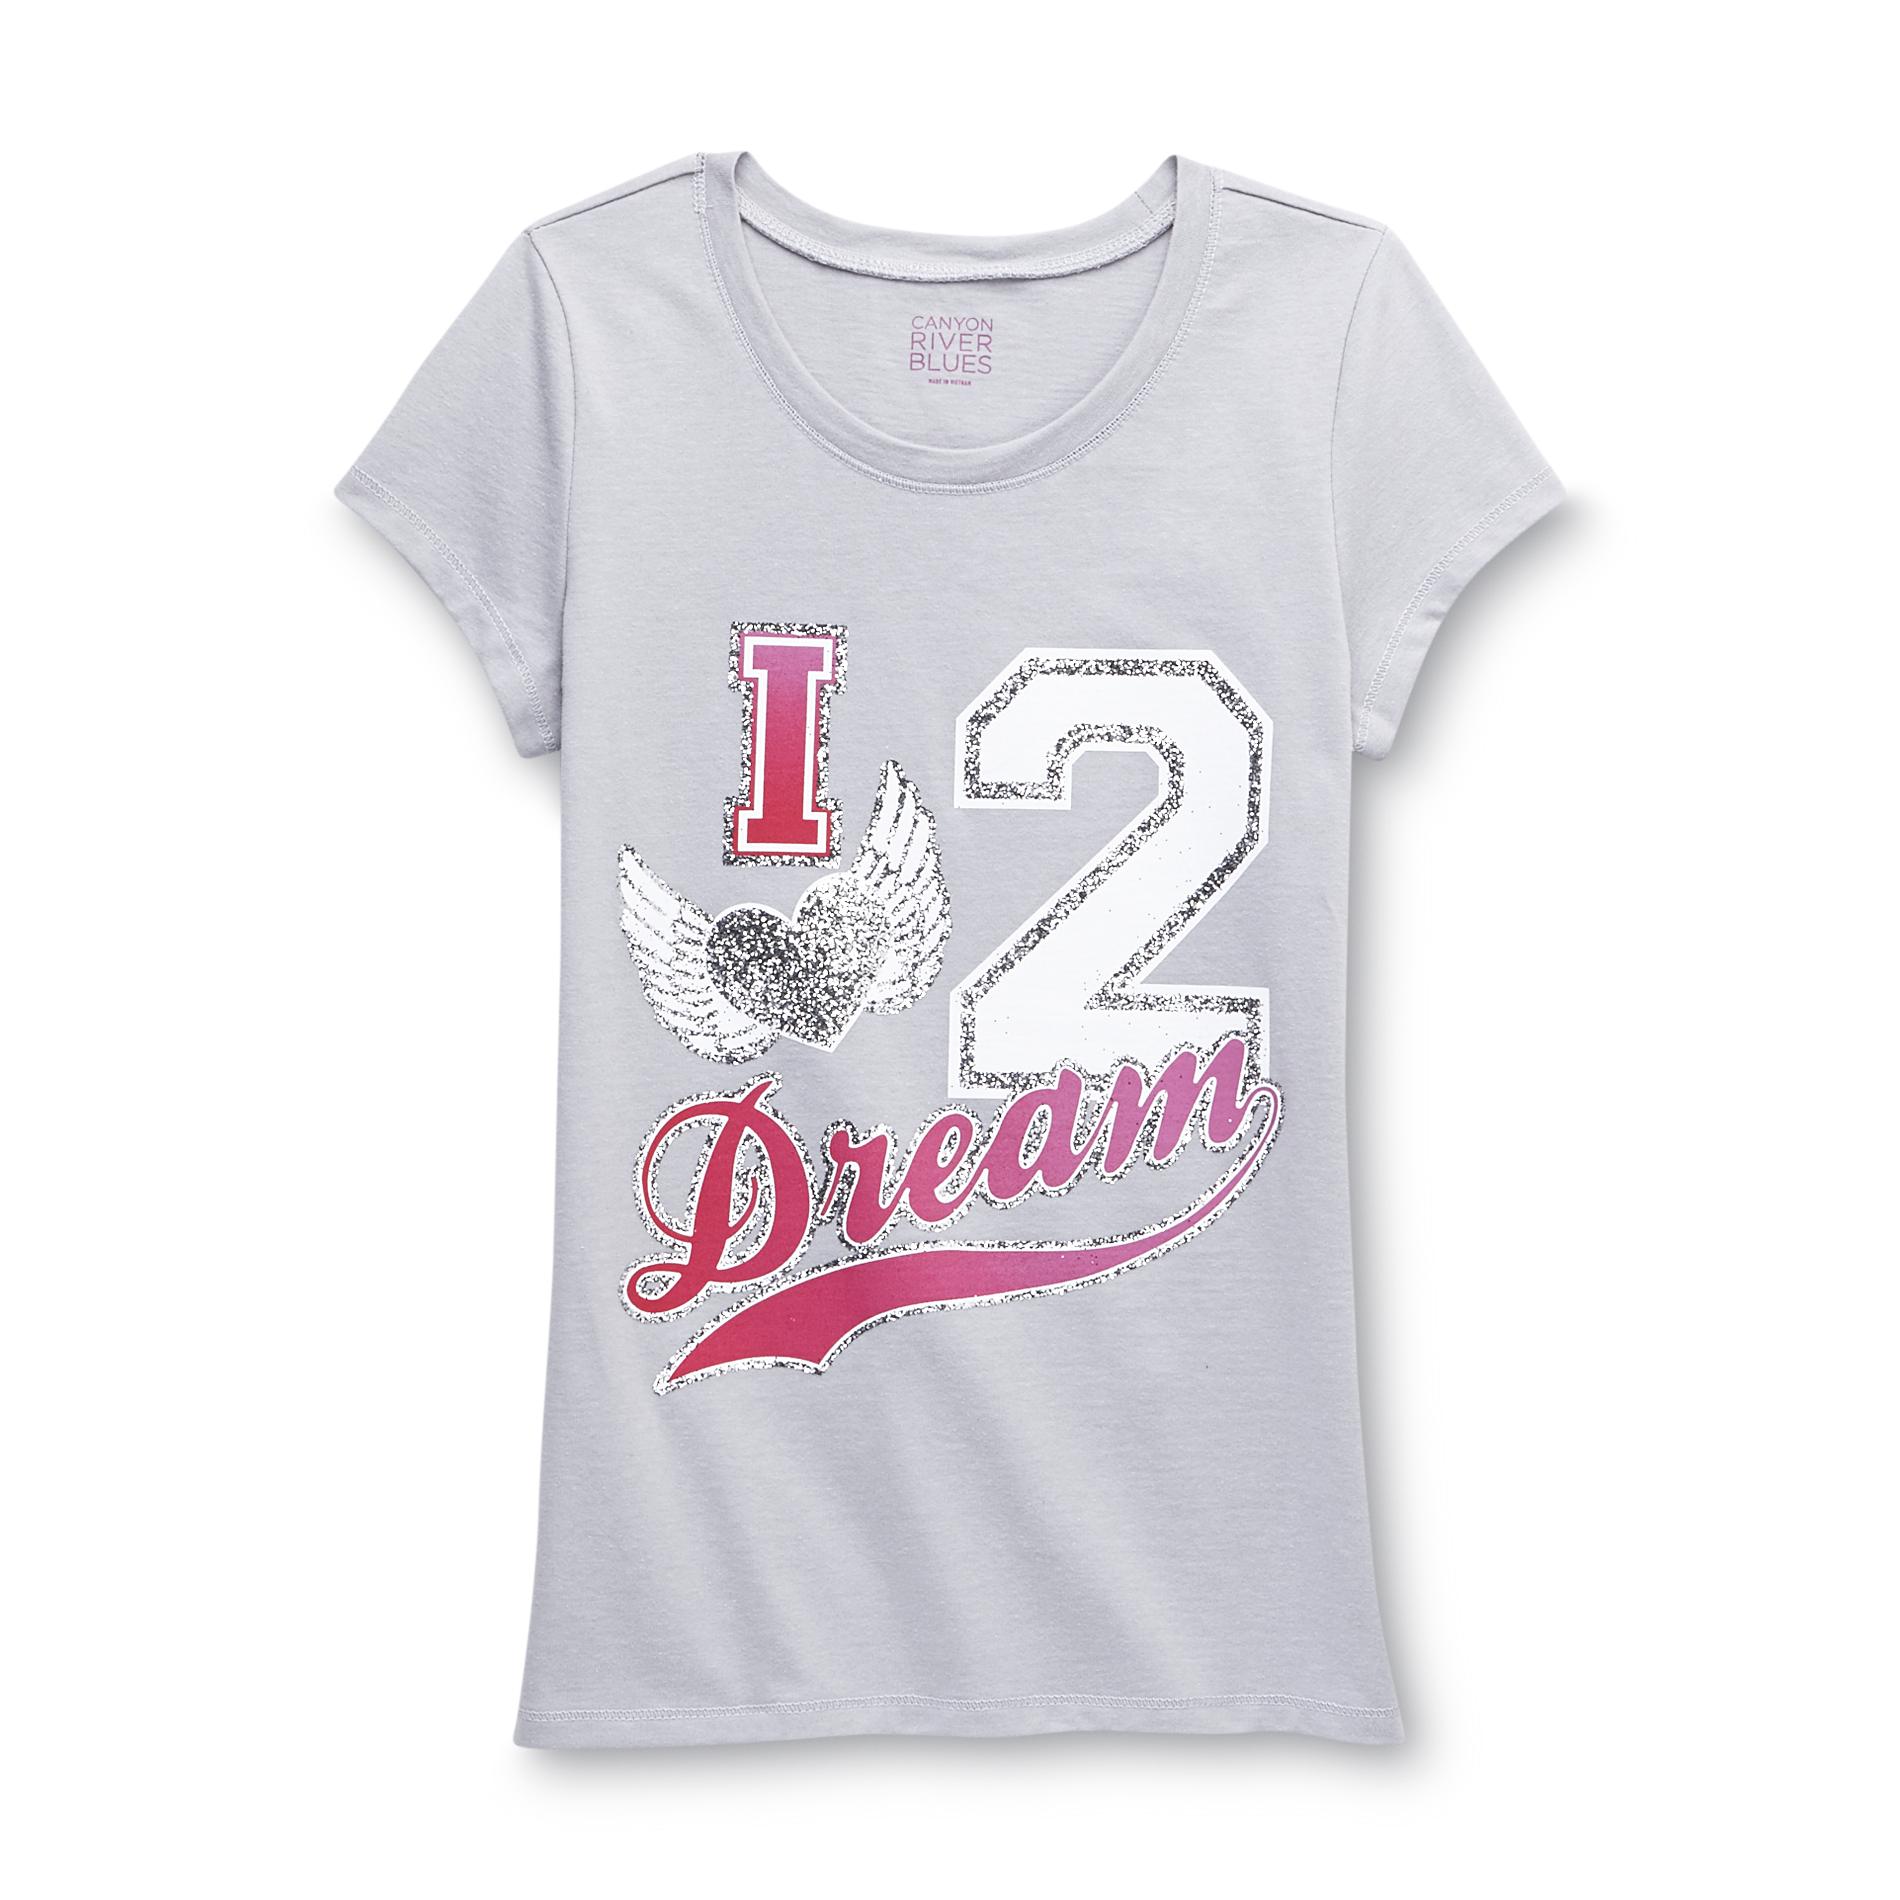 Canyon River Blues Girl's Graphic T-Shirt - I Love 2 Dream